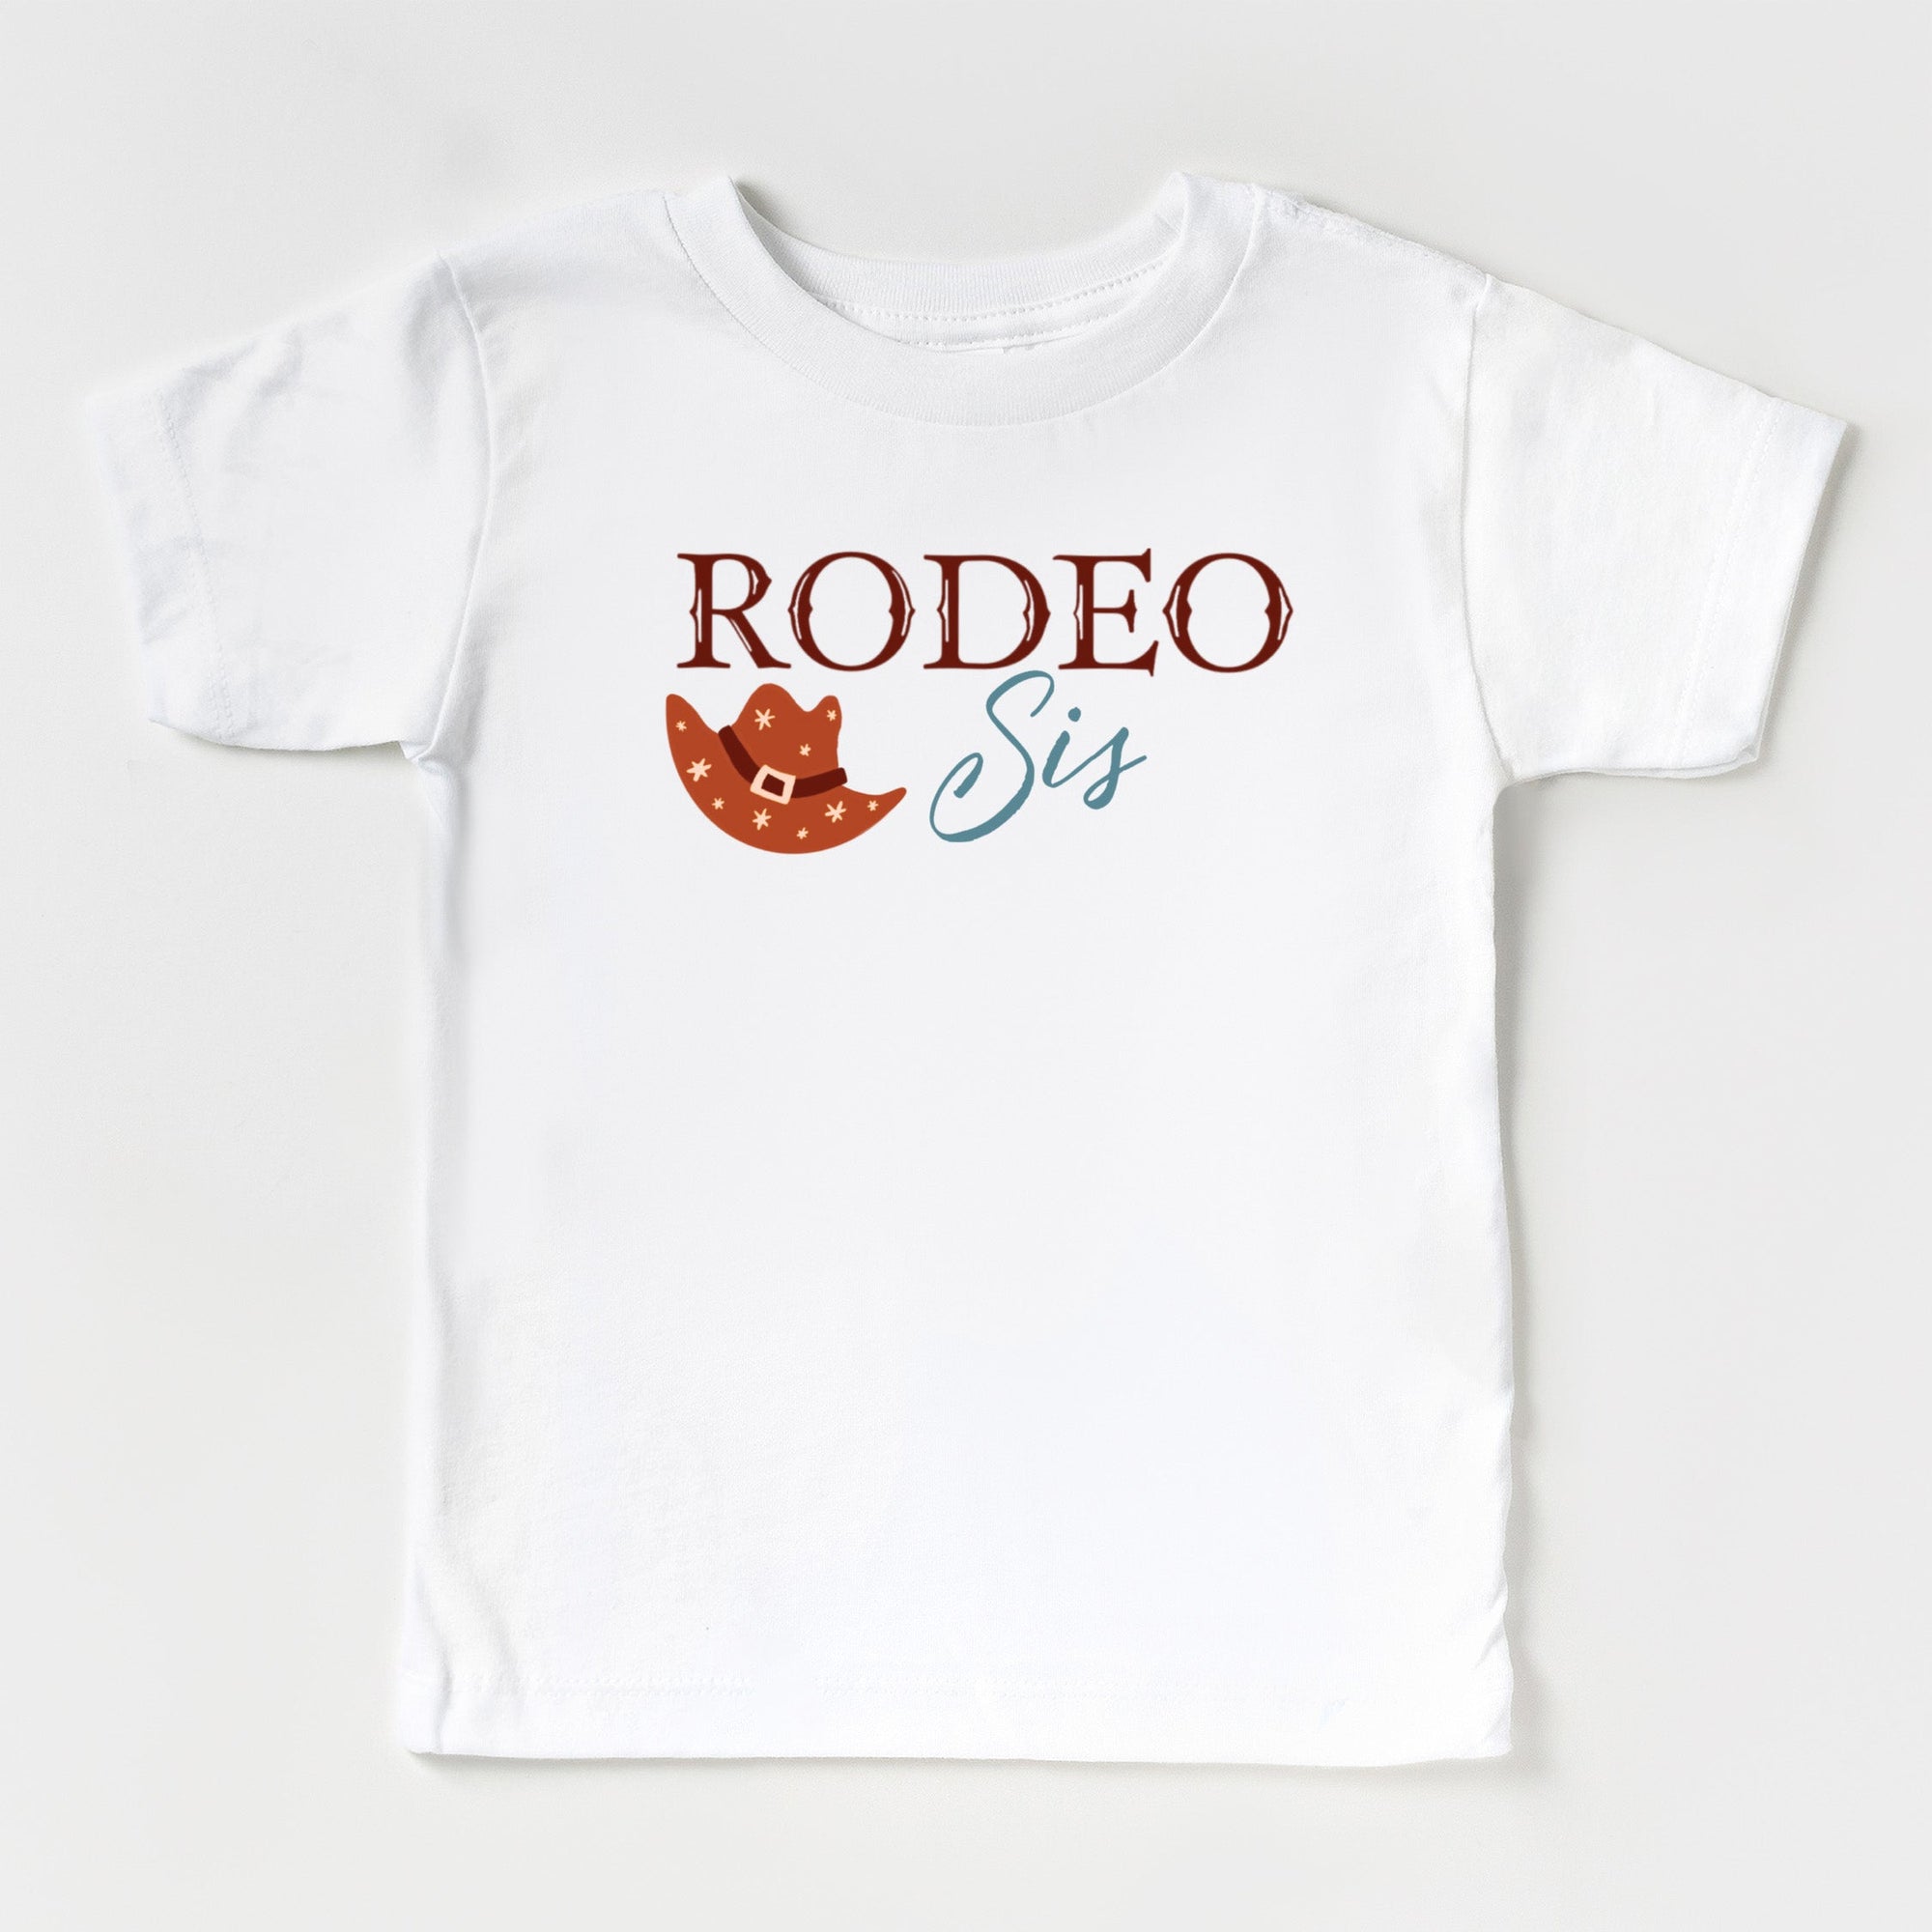 Cuddle Sleep Dream Baby & Toddler Tops Toddler/Youth Matching | First Rodeo Tshirt